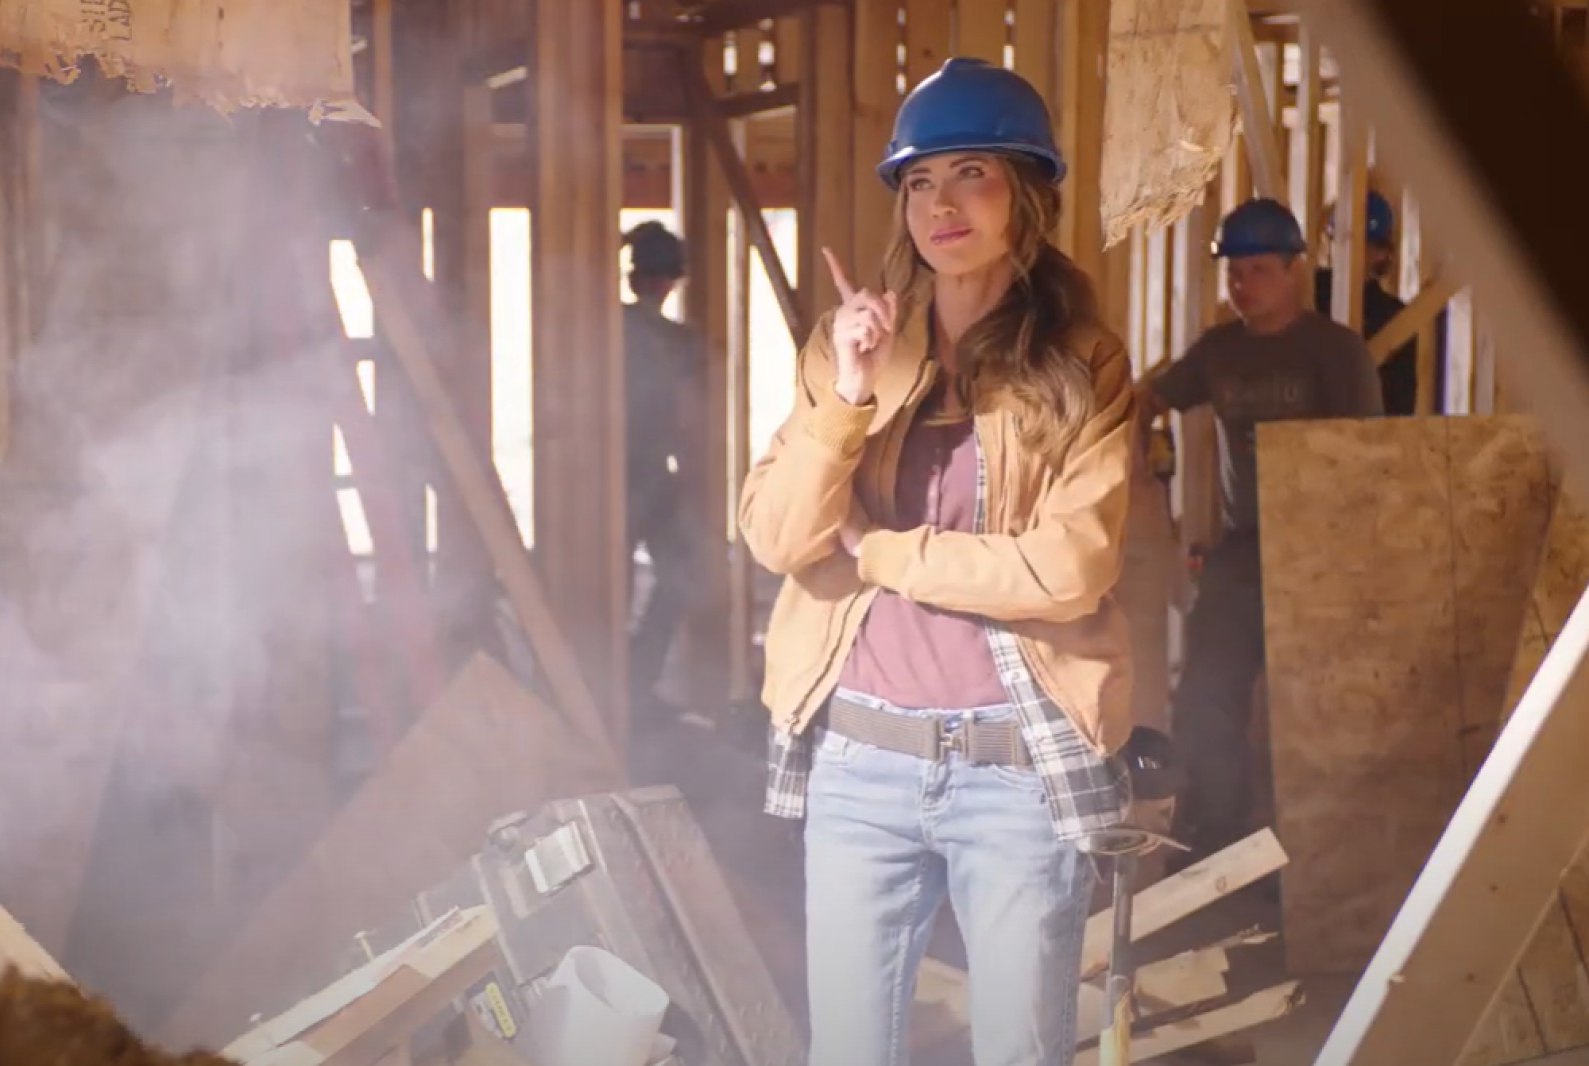  Home builders interpret latest Freedom Works Here ad as recruiting workers, not bosses 